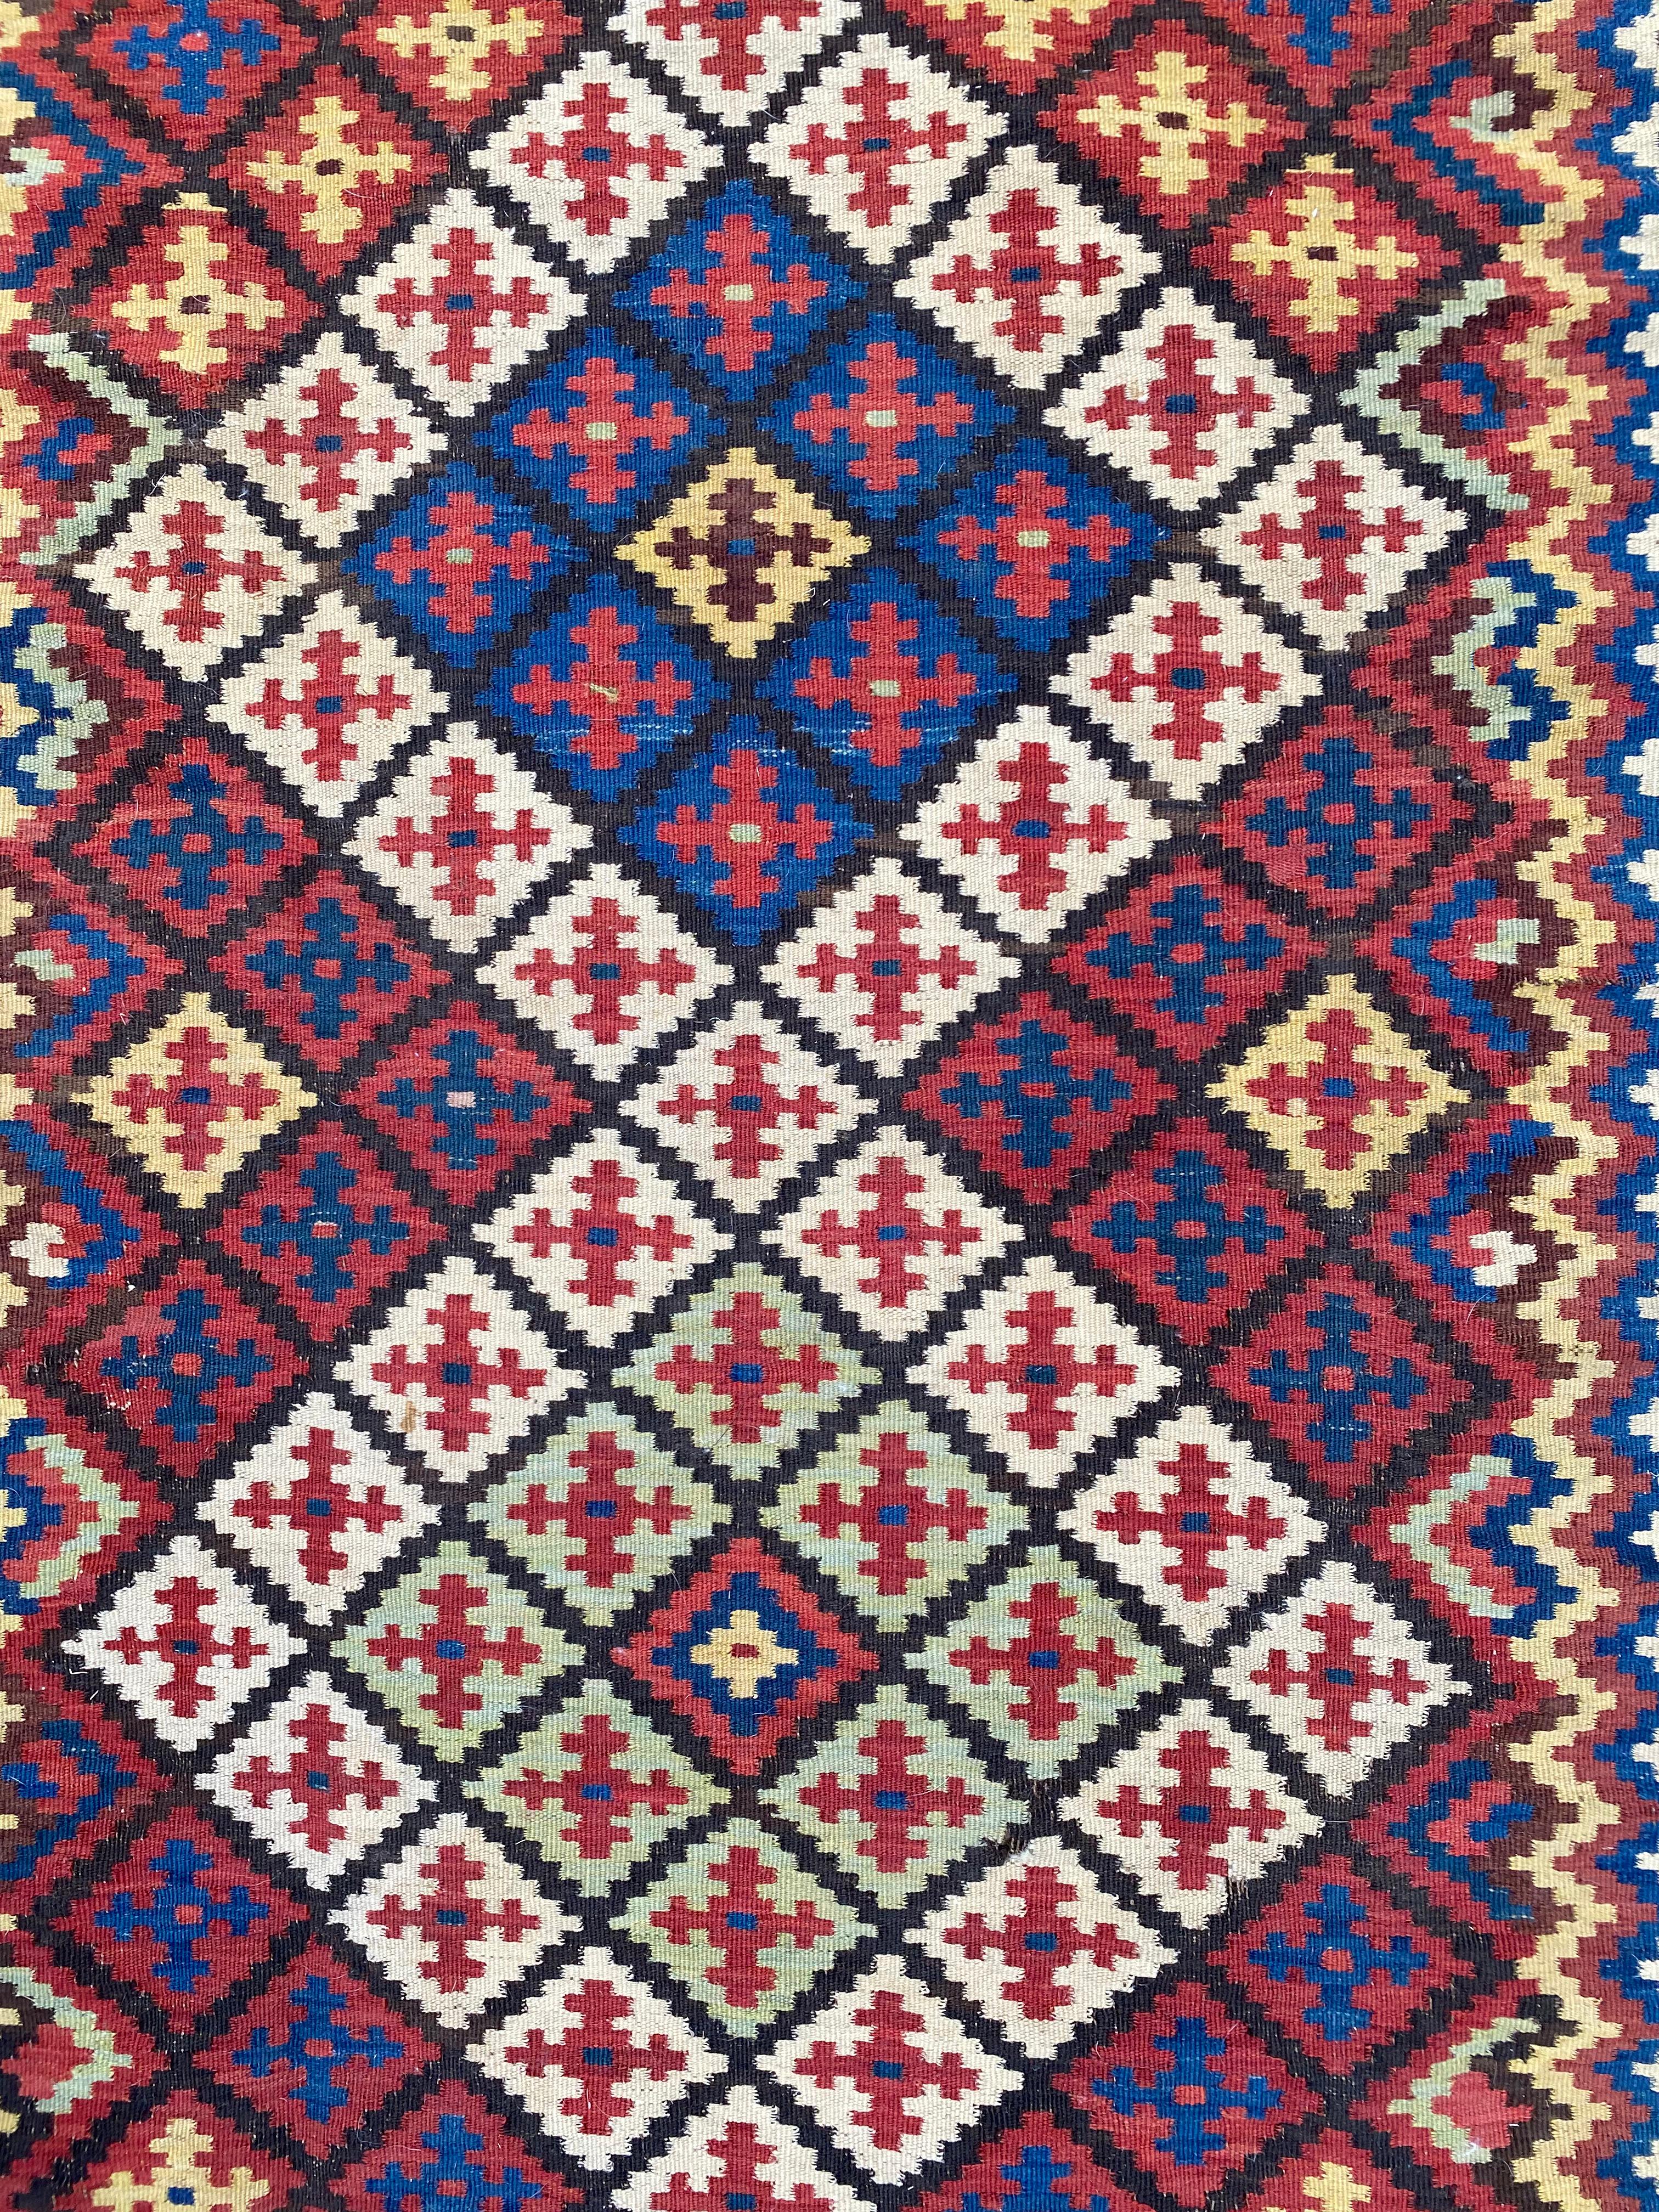 This Antique Uzbekistan Tartari Kilim was crafted from the prolific and diverse Uzbek weavers of Sar-i-Pul. It was crafted using a distinct weave double-interlock technique and employs a grid pattern of diamond shapes. Sar-i-Pul is a town set in the